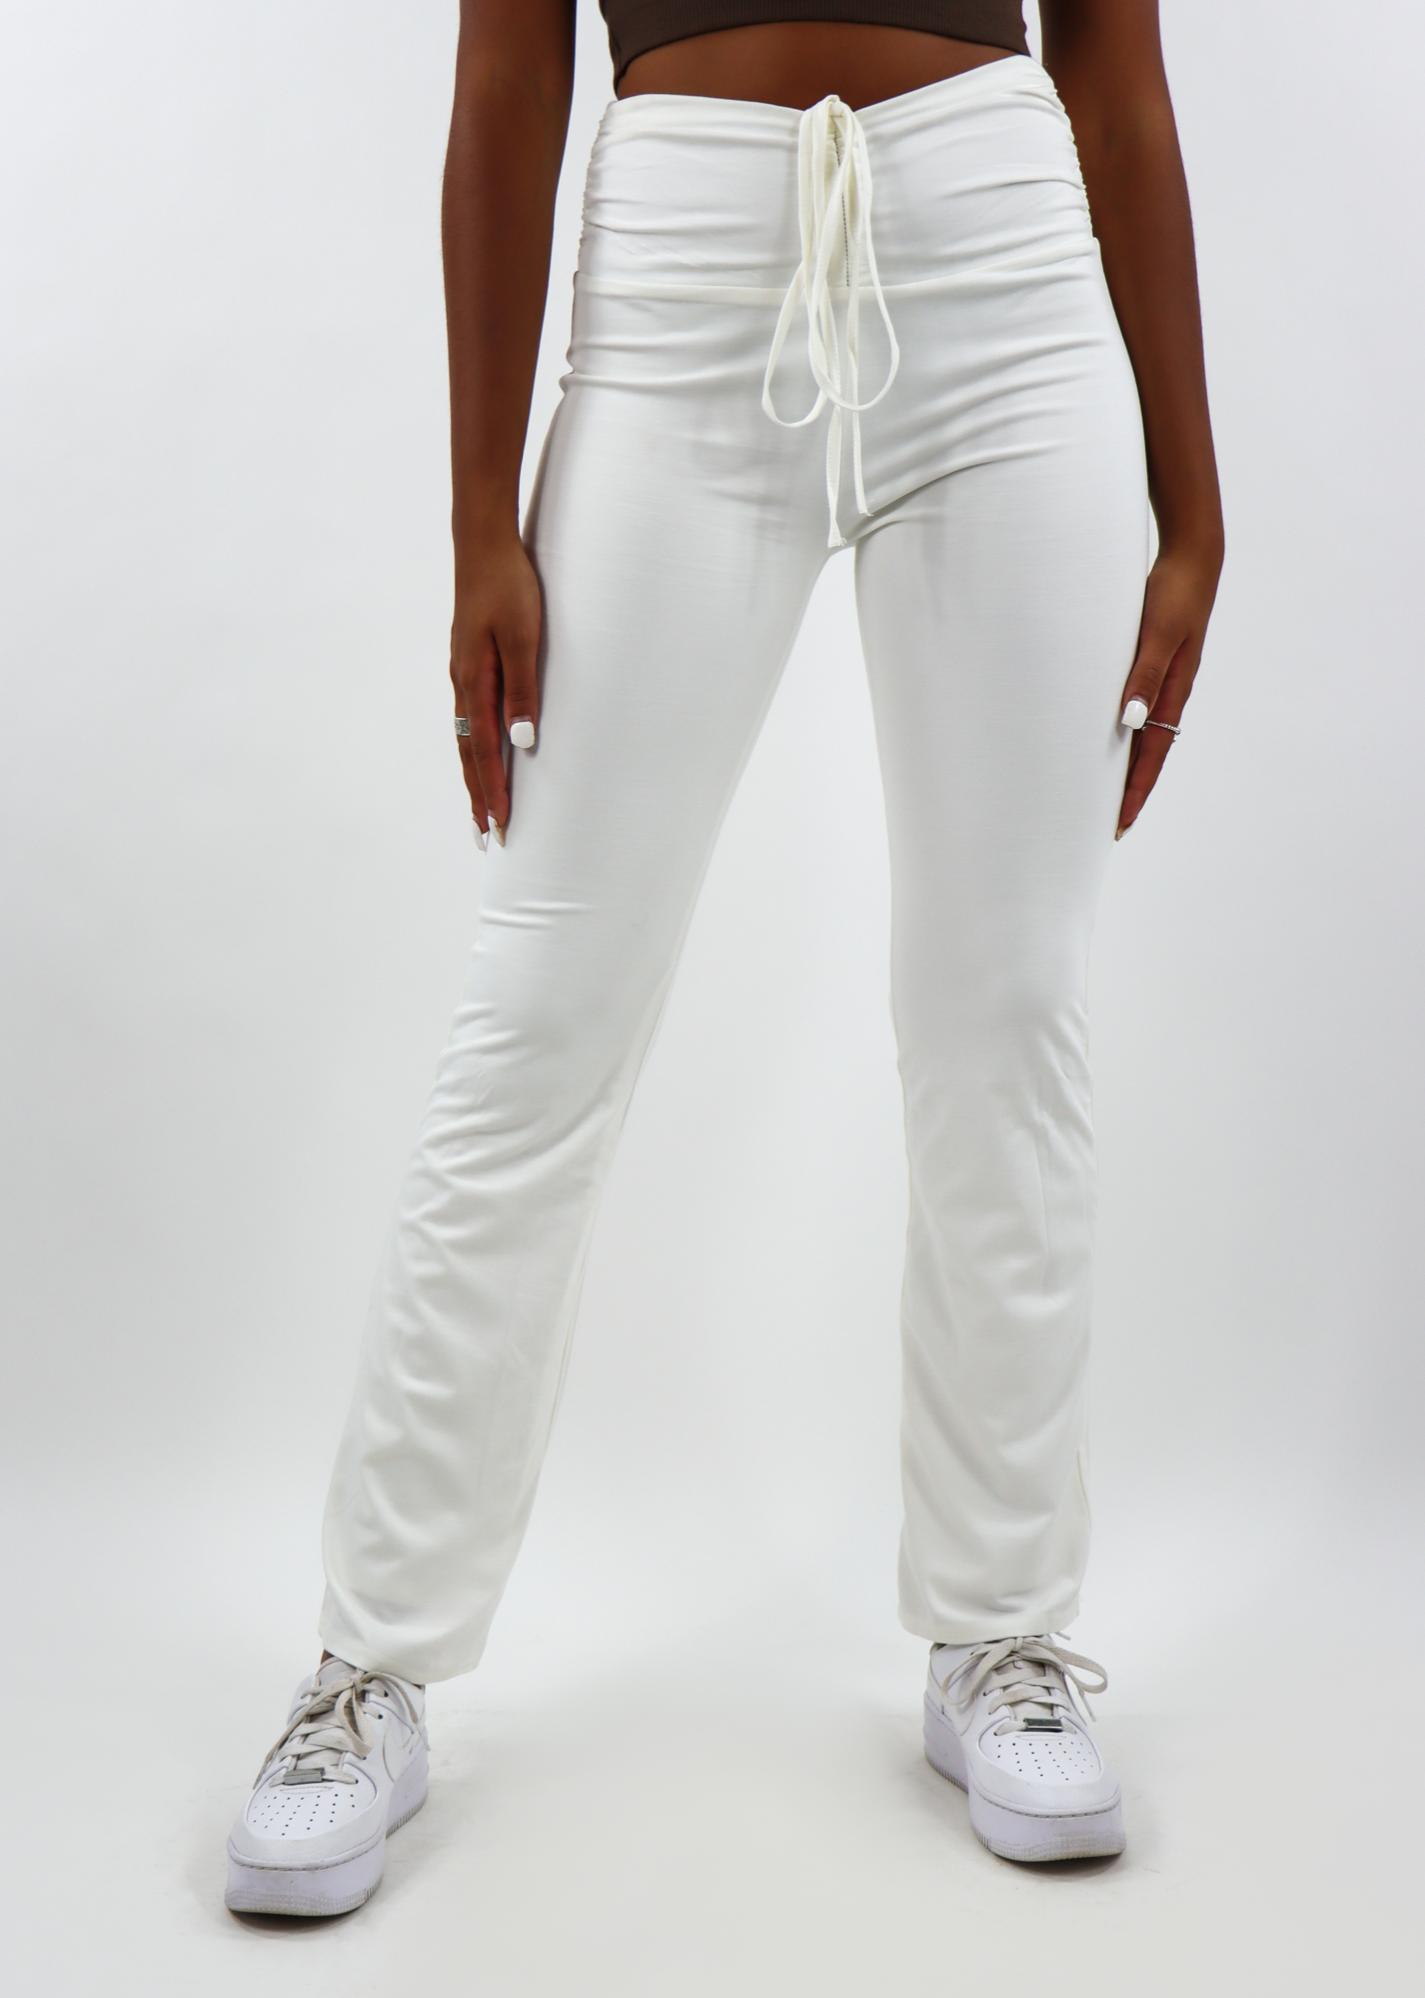 Stay Next To Me Pants ☆ White – Rock N Rags